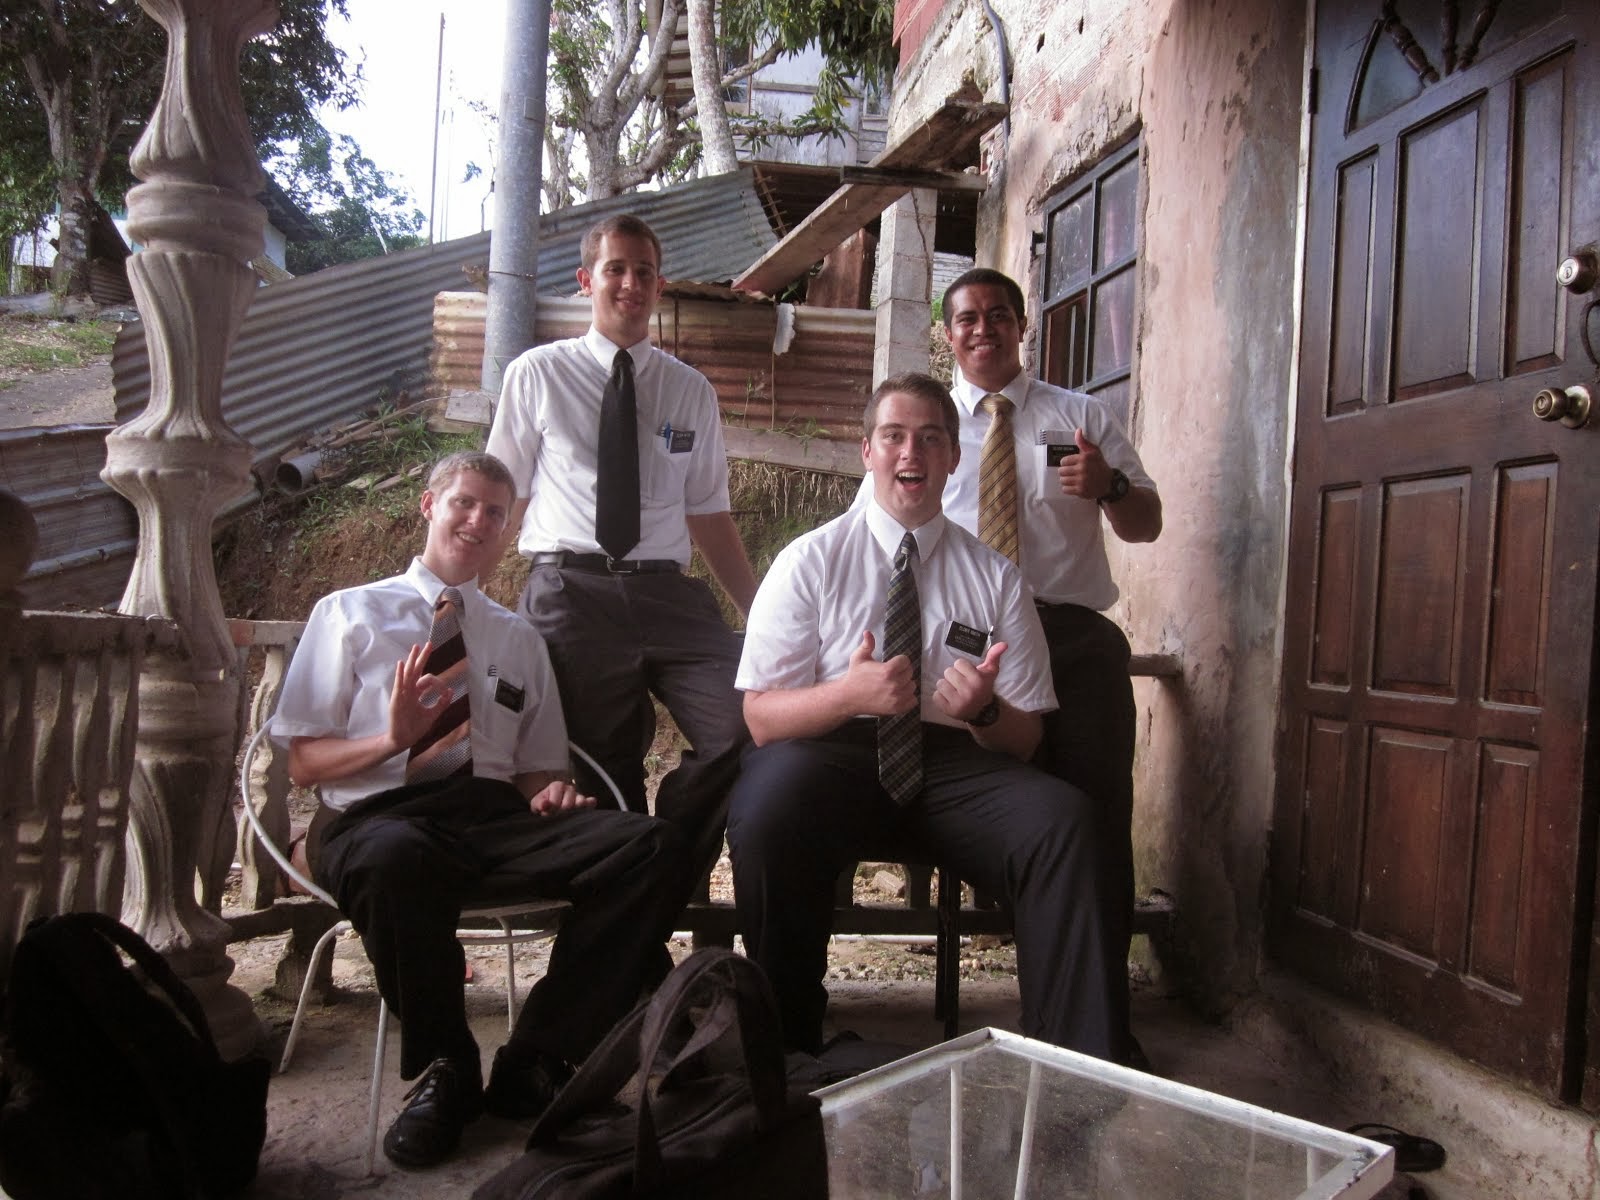 The other missionaries